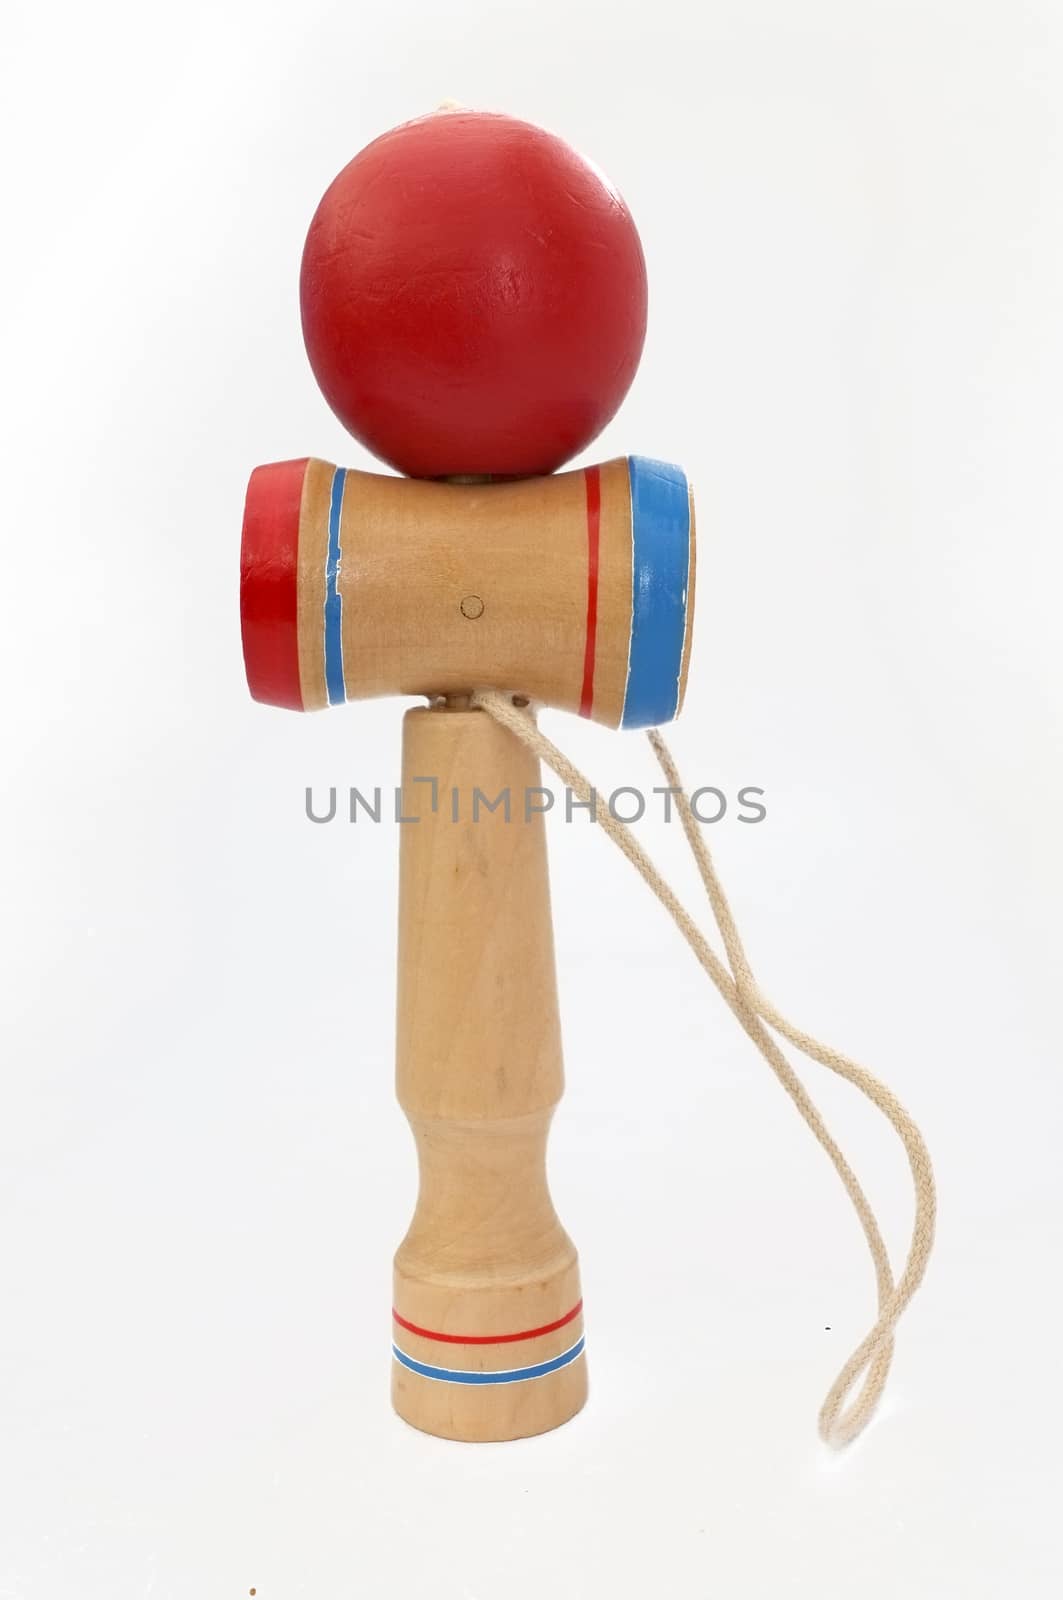 Kendama, a traditional Japanese toy consisting of a sword and a ball connected by a string rolled in heart shape